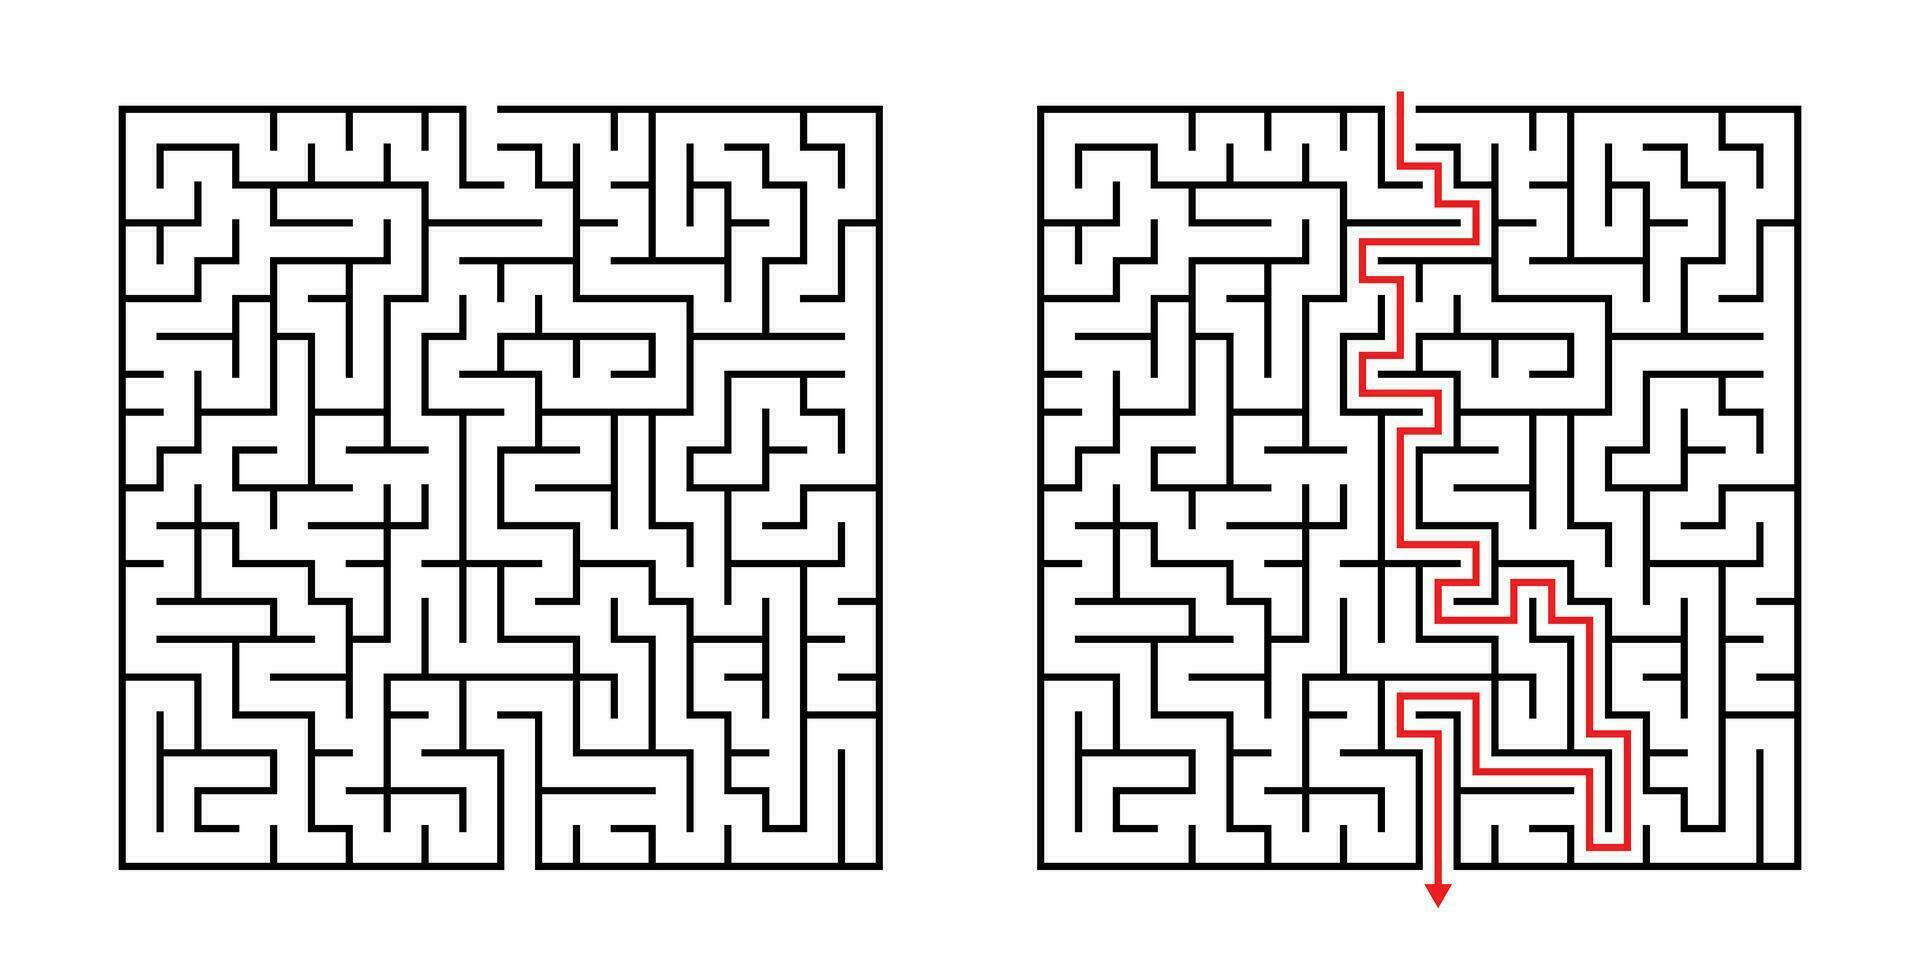 Vector Square Maze - Labyrinth with Included Solution in Black Red. Funny Educational Mind Game for Coordination, Problems Solving, Decision Making Skills Test.